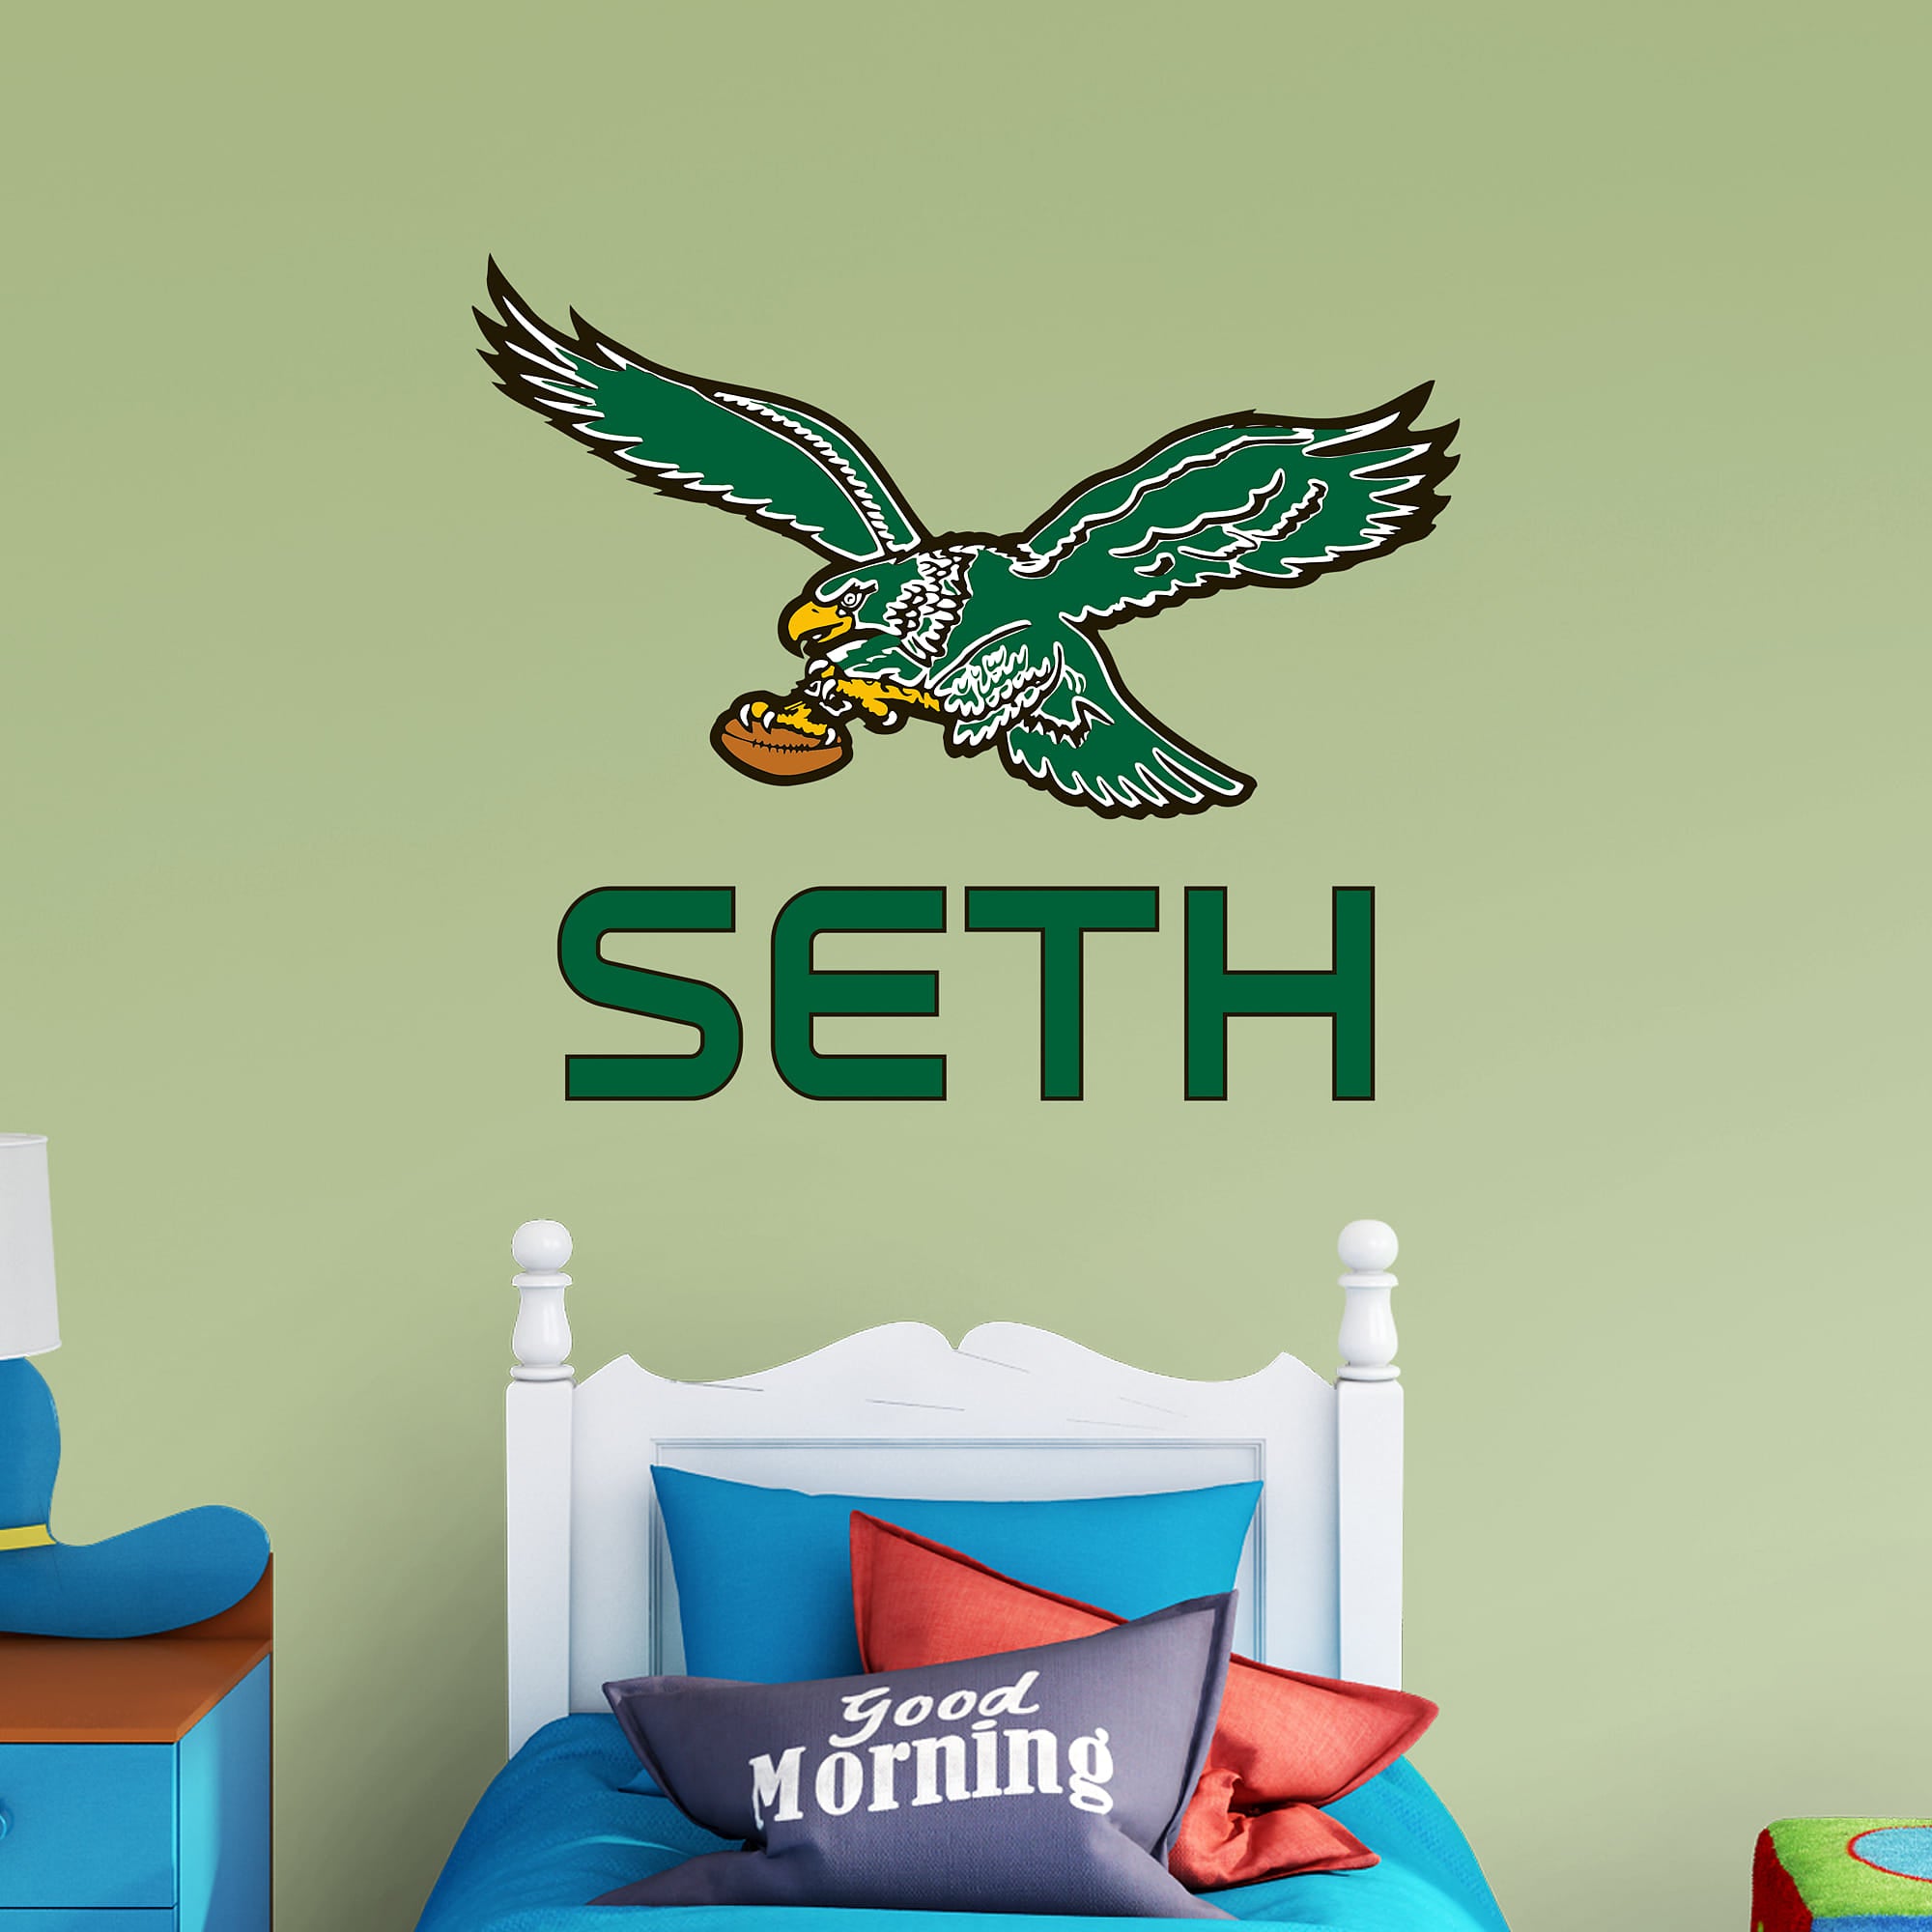 Philadelphia Eagles: Classic Stacked Personalized Name - Officially Licensed NFL Transfer Decal in Green (52"W x 39.5"H) by Fath